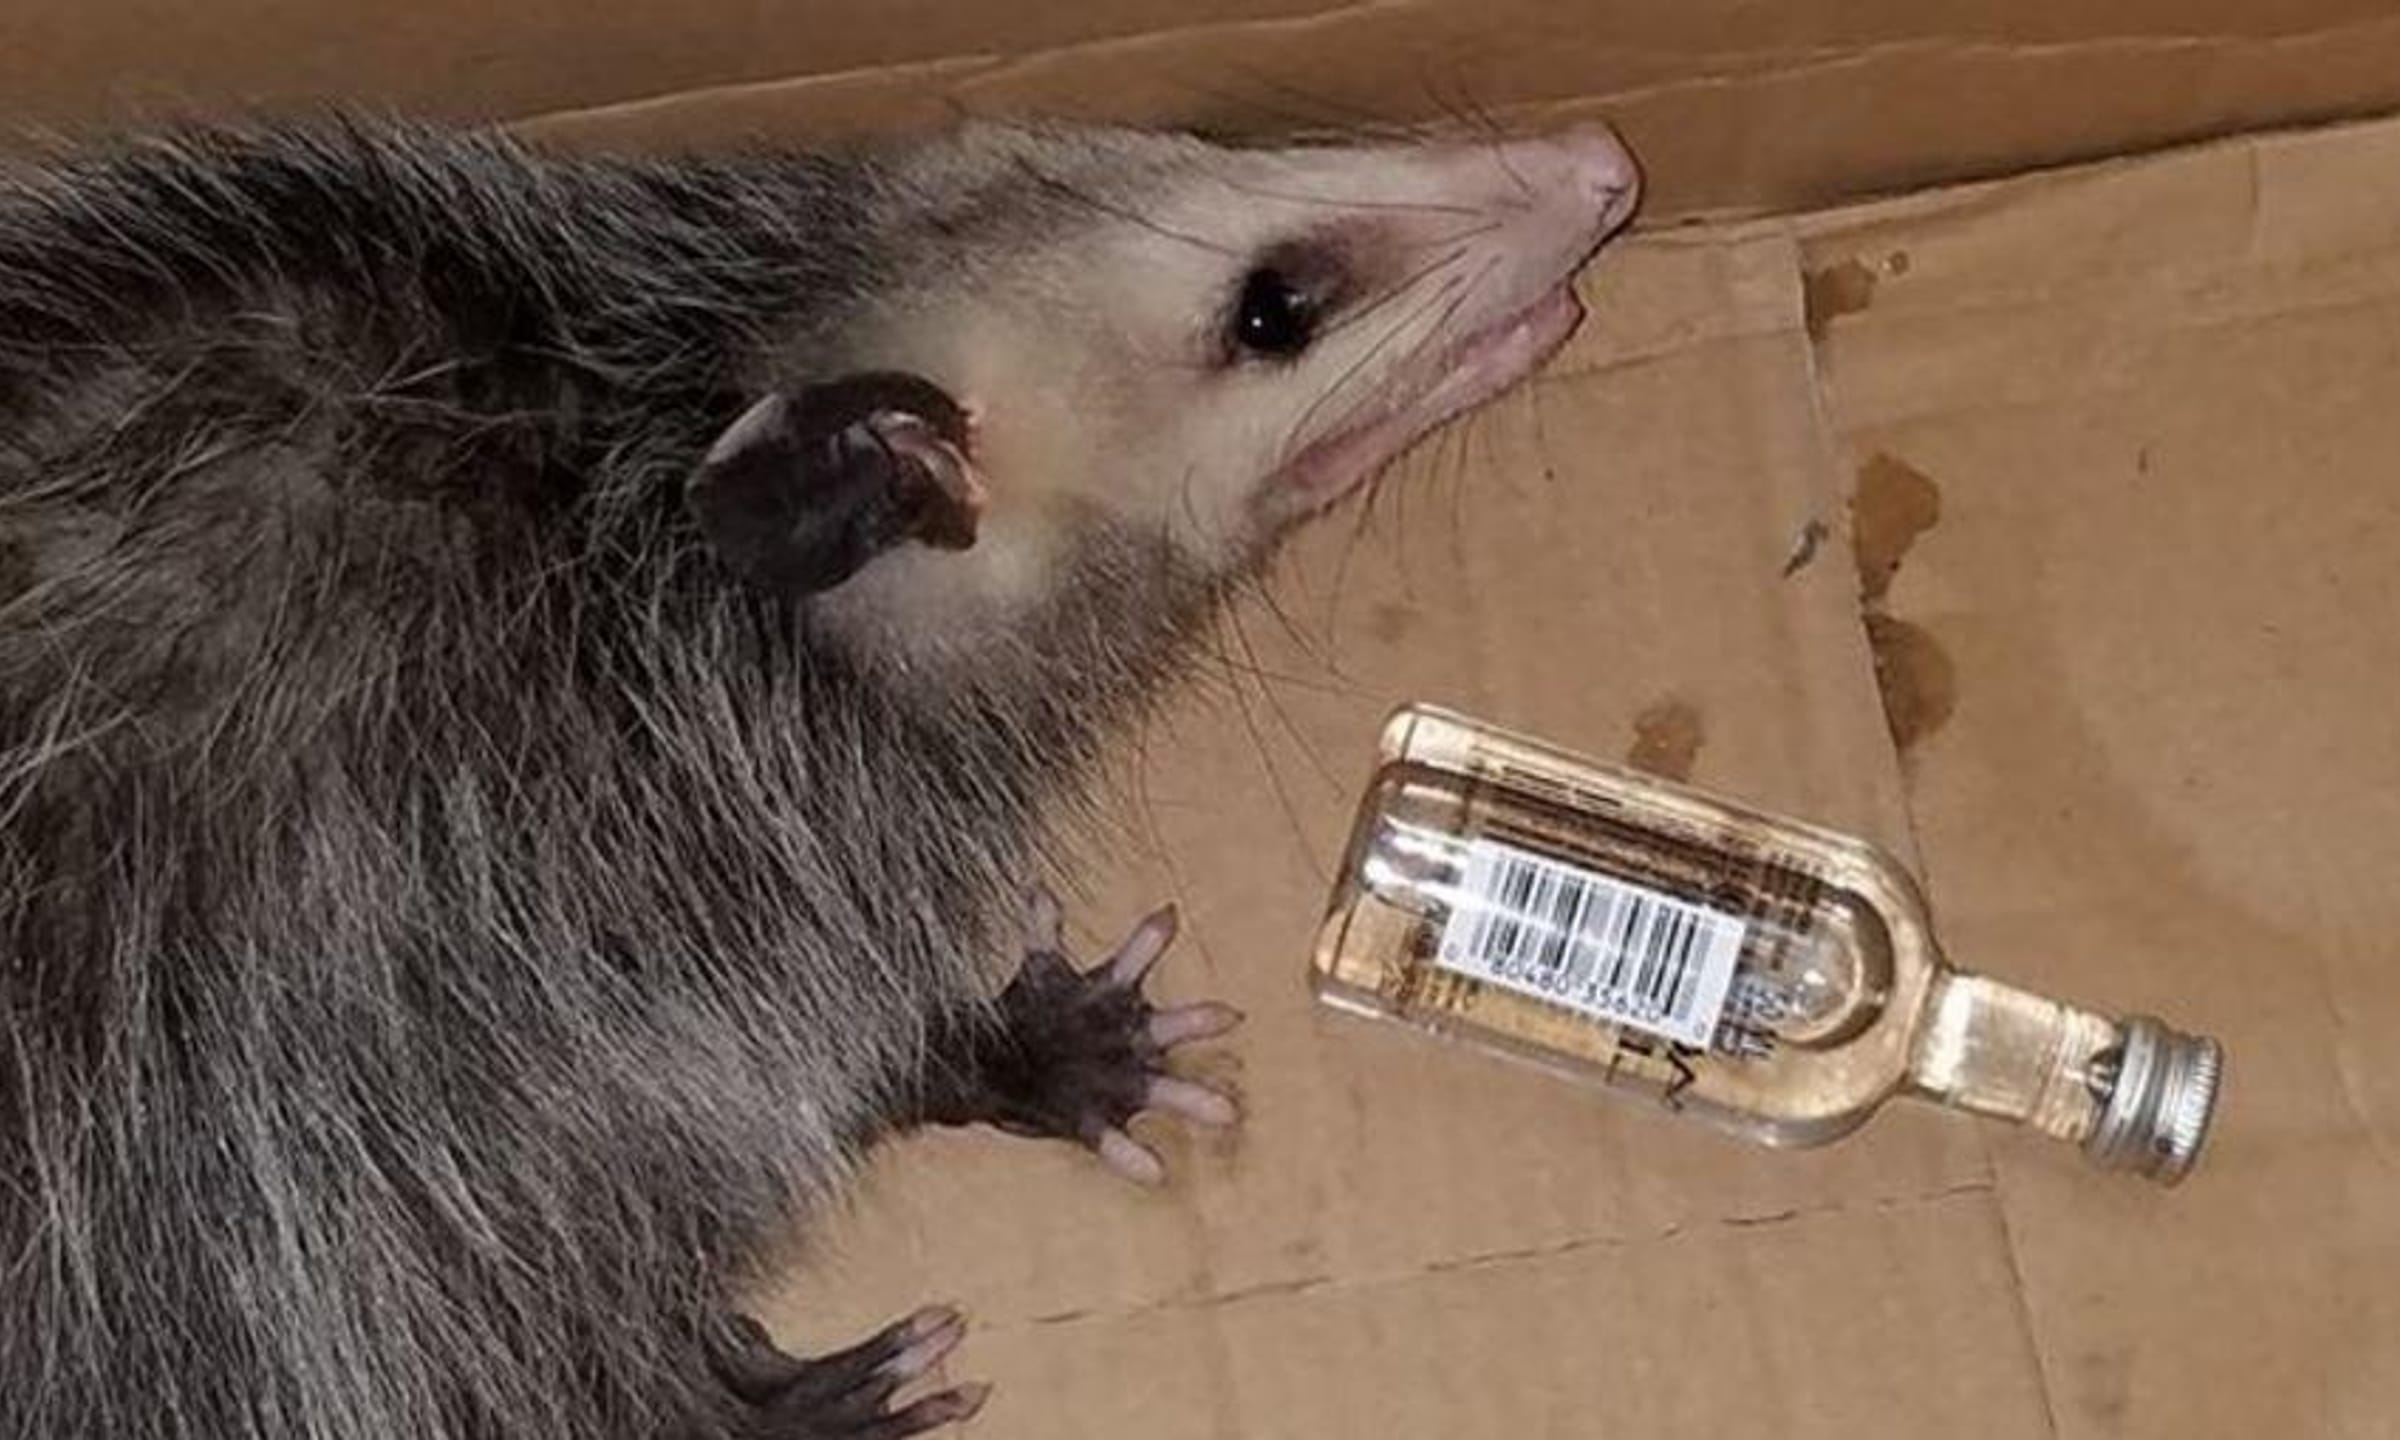 A picture of an opossum in front of a small bottle that could have liquor.